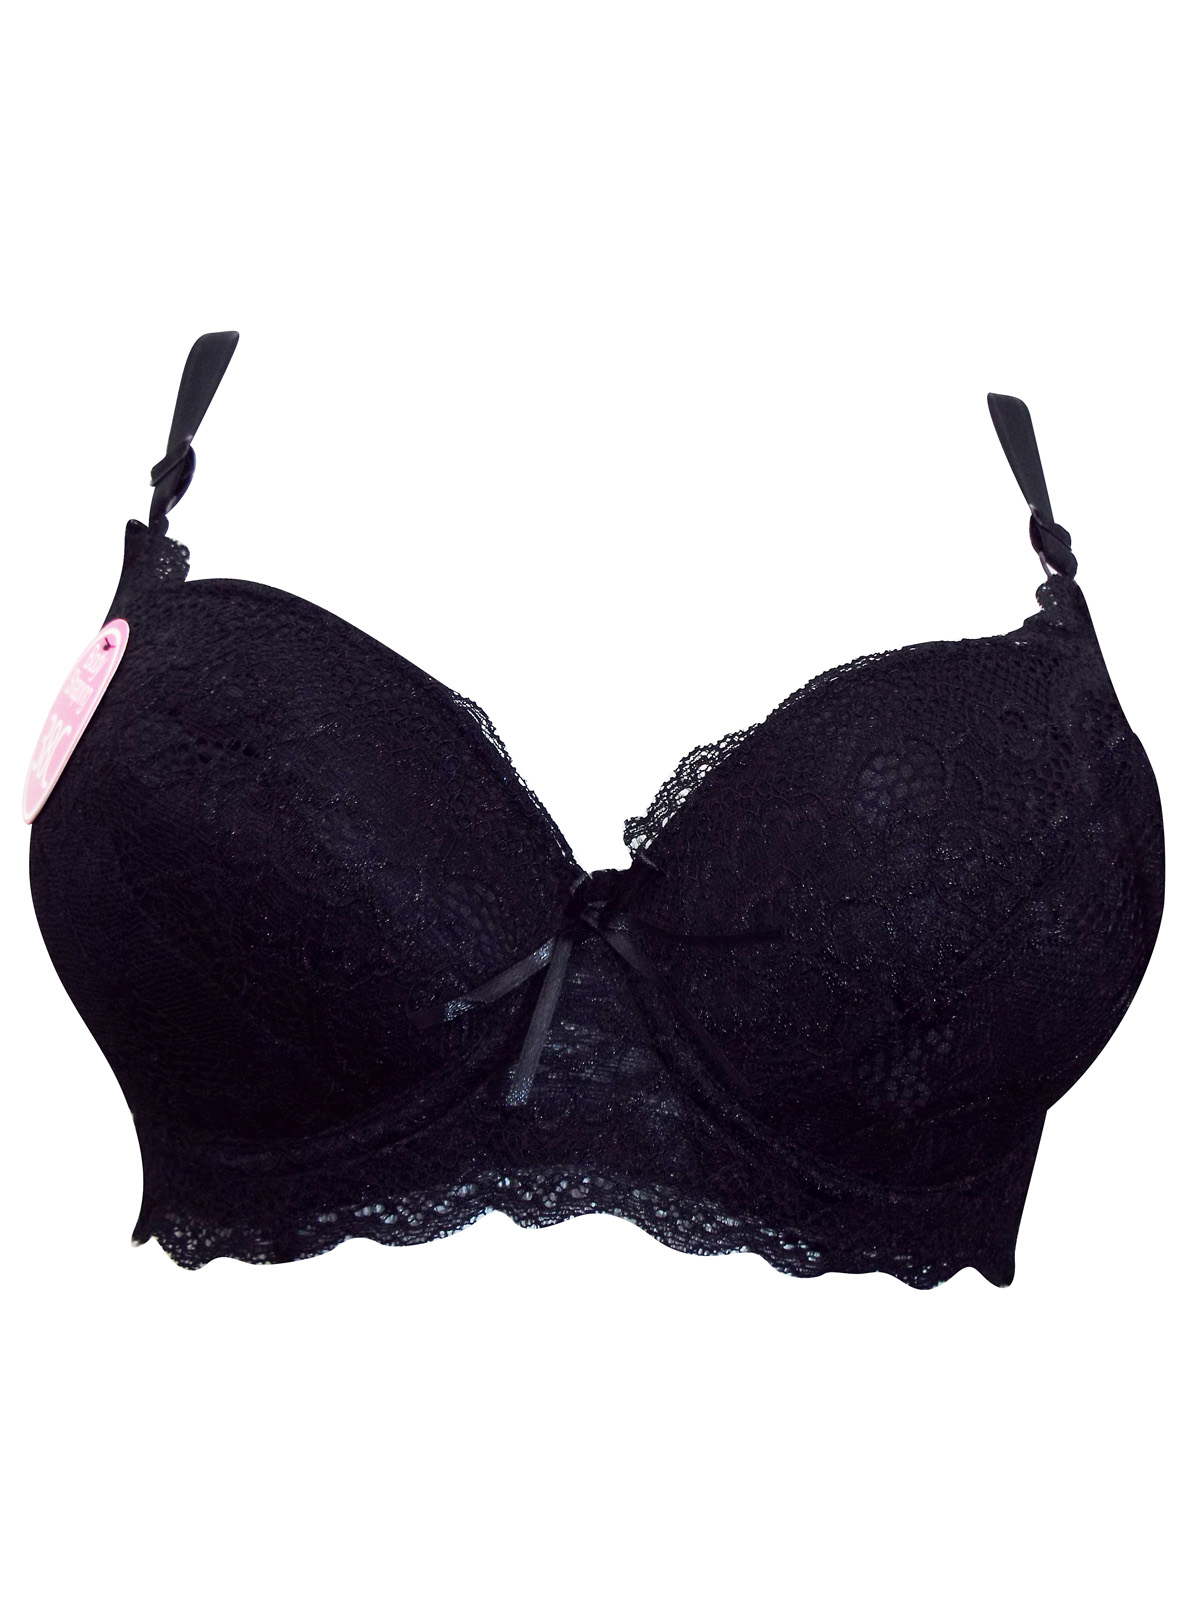 Hana - - Hana BLACK Floral Lace Padded & Wired Full Cup Bra - Size 38 to 48  (C cup)